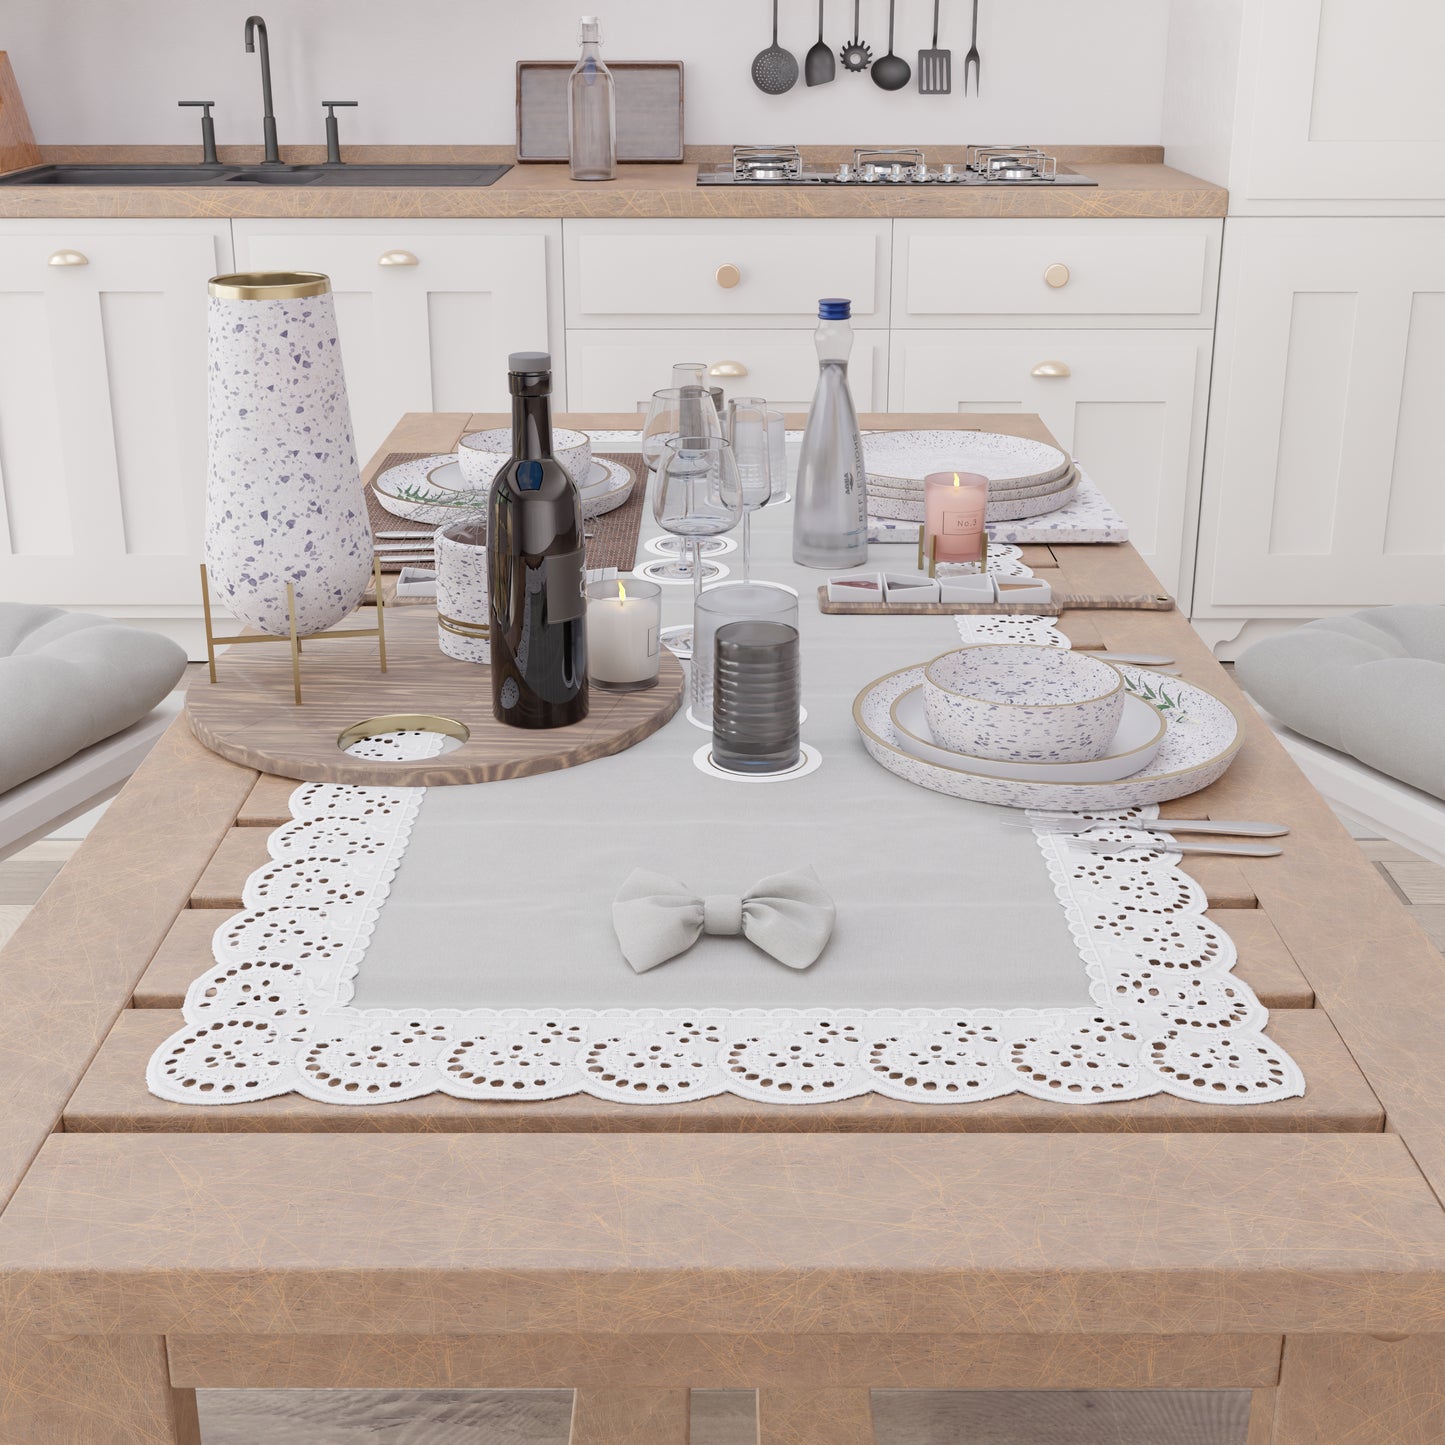 Elegant Shabby Chic Table Runner with Lace and Light Gray Bows 